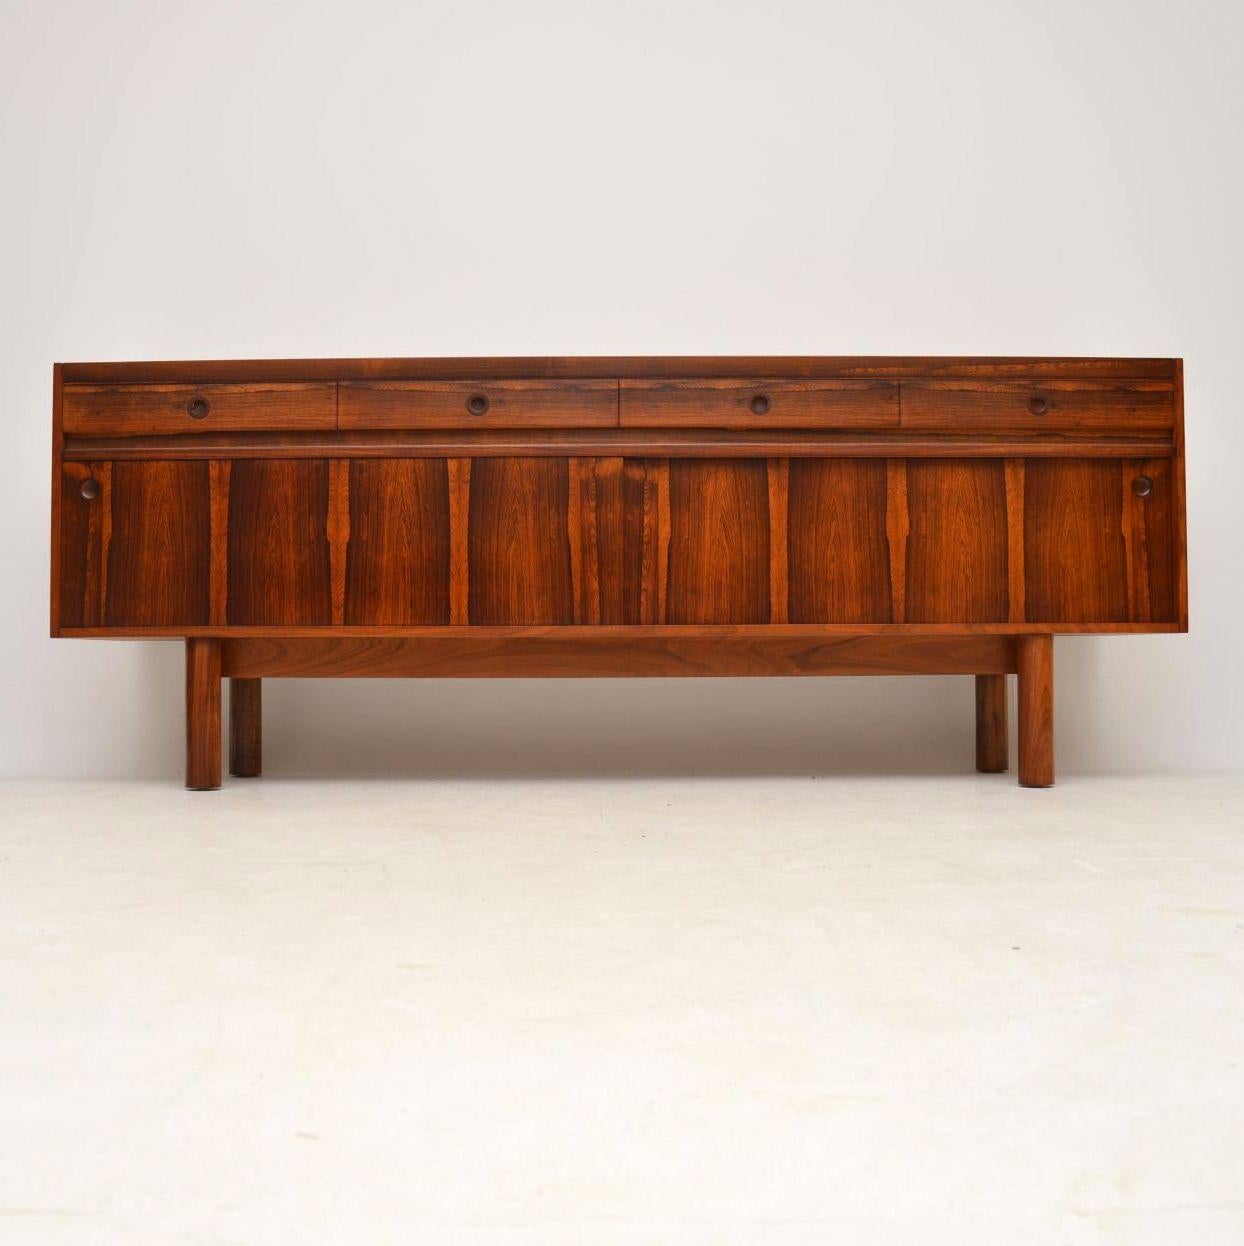 A stunning vintage sideboard, this was designed by Robert Heritage and was made by Archie Shine in the 1960s. It’s of amazing quality, with stunning wood grain patterns and a beautiful color. We have had this stripped and re-polished to a very high